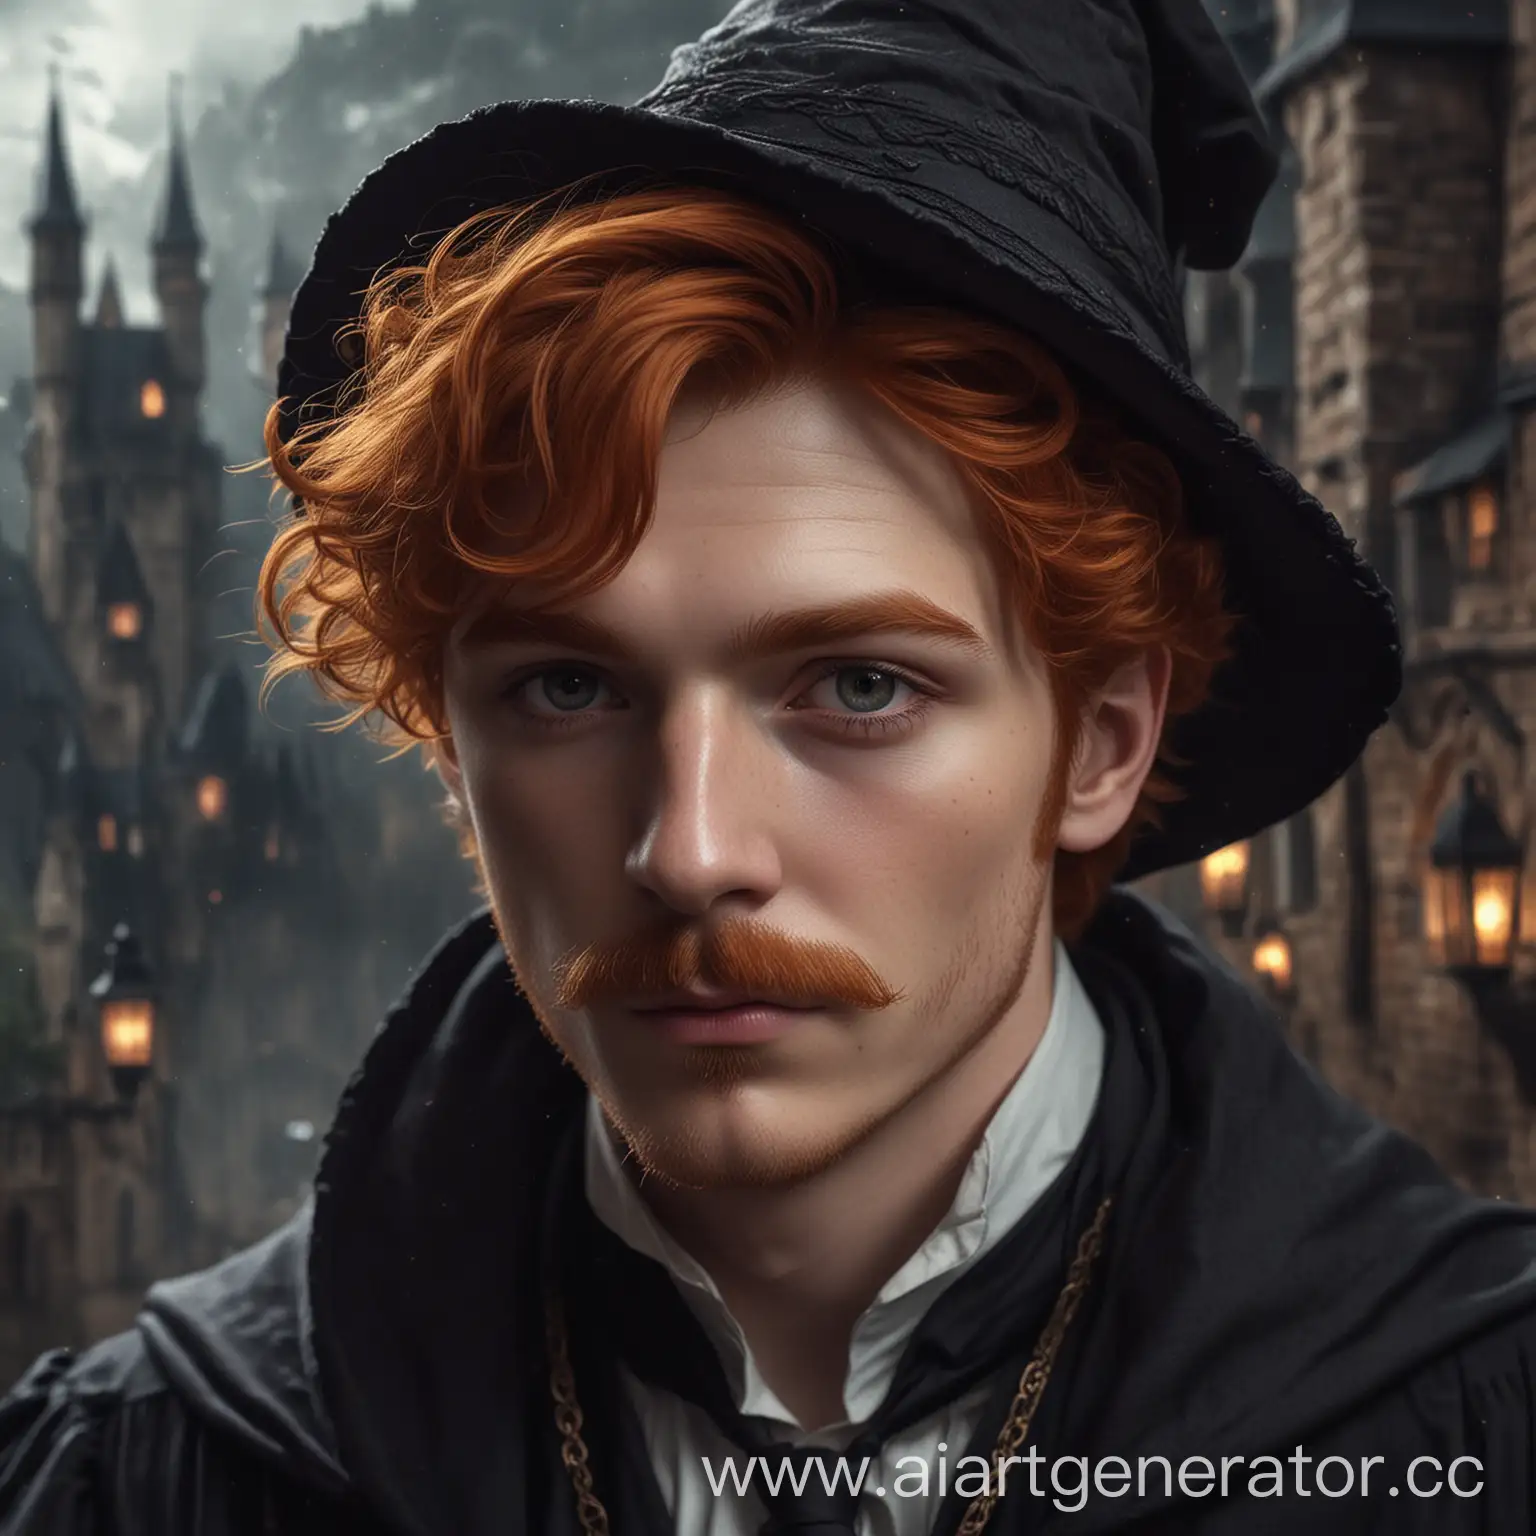 young wizard, ginger hair, total black eyes, with mustache, fantasy setting, art